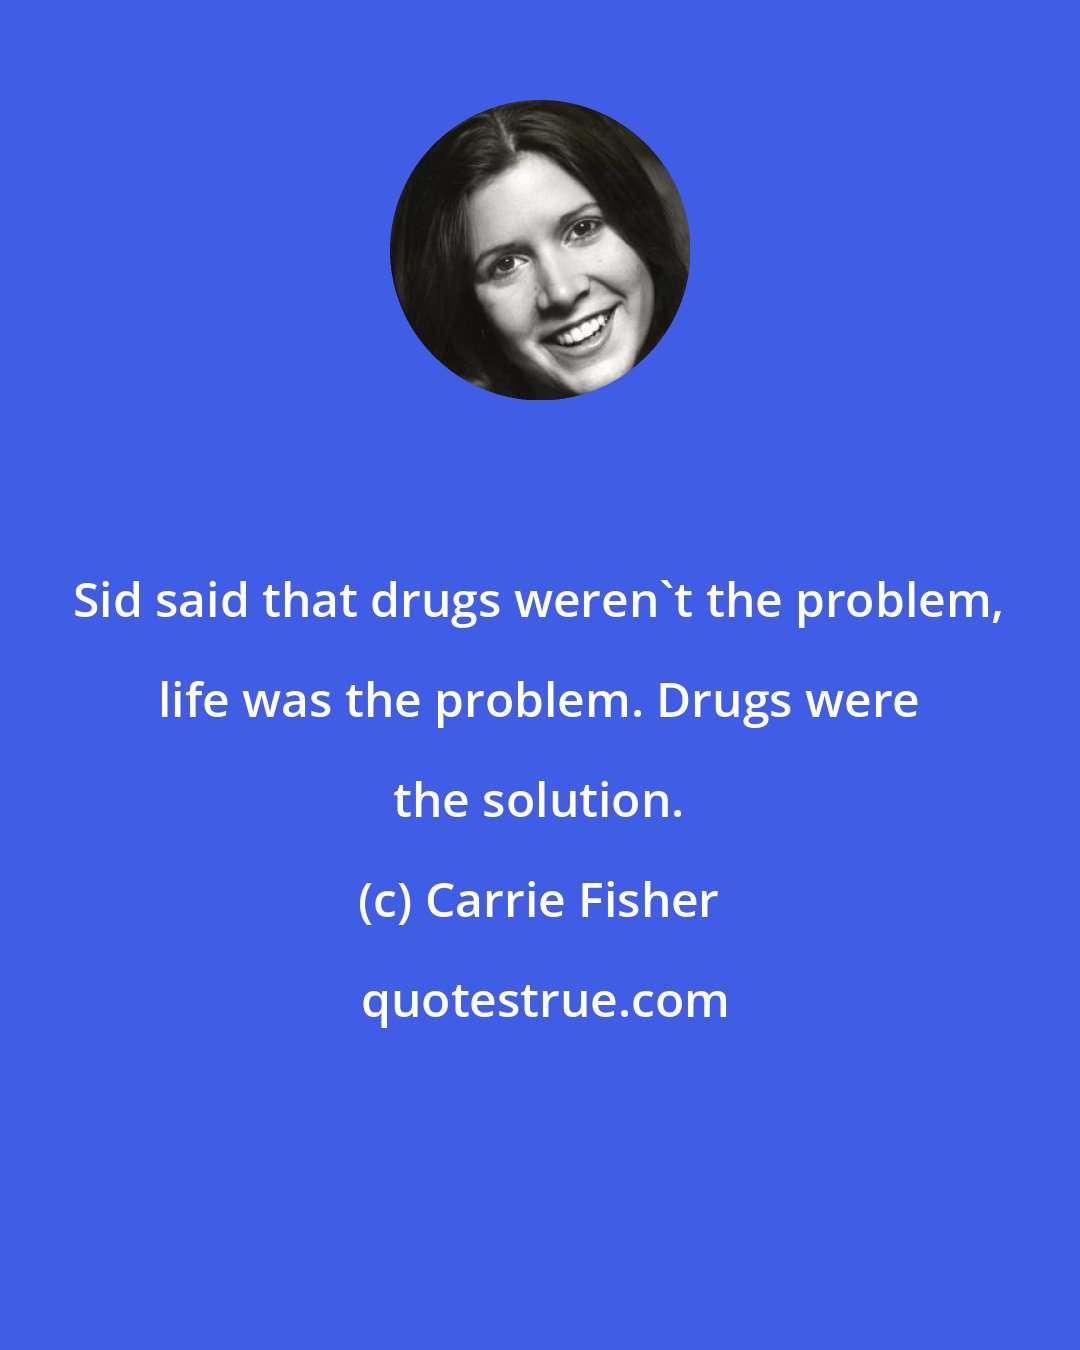 Carrie Fisher: Sid said that drugs weren't the problem, life was the problem. Drugs were the solution.